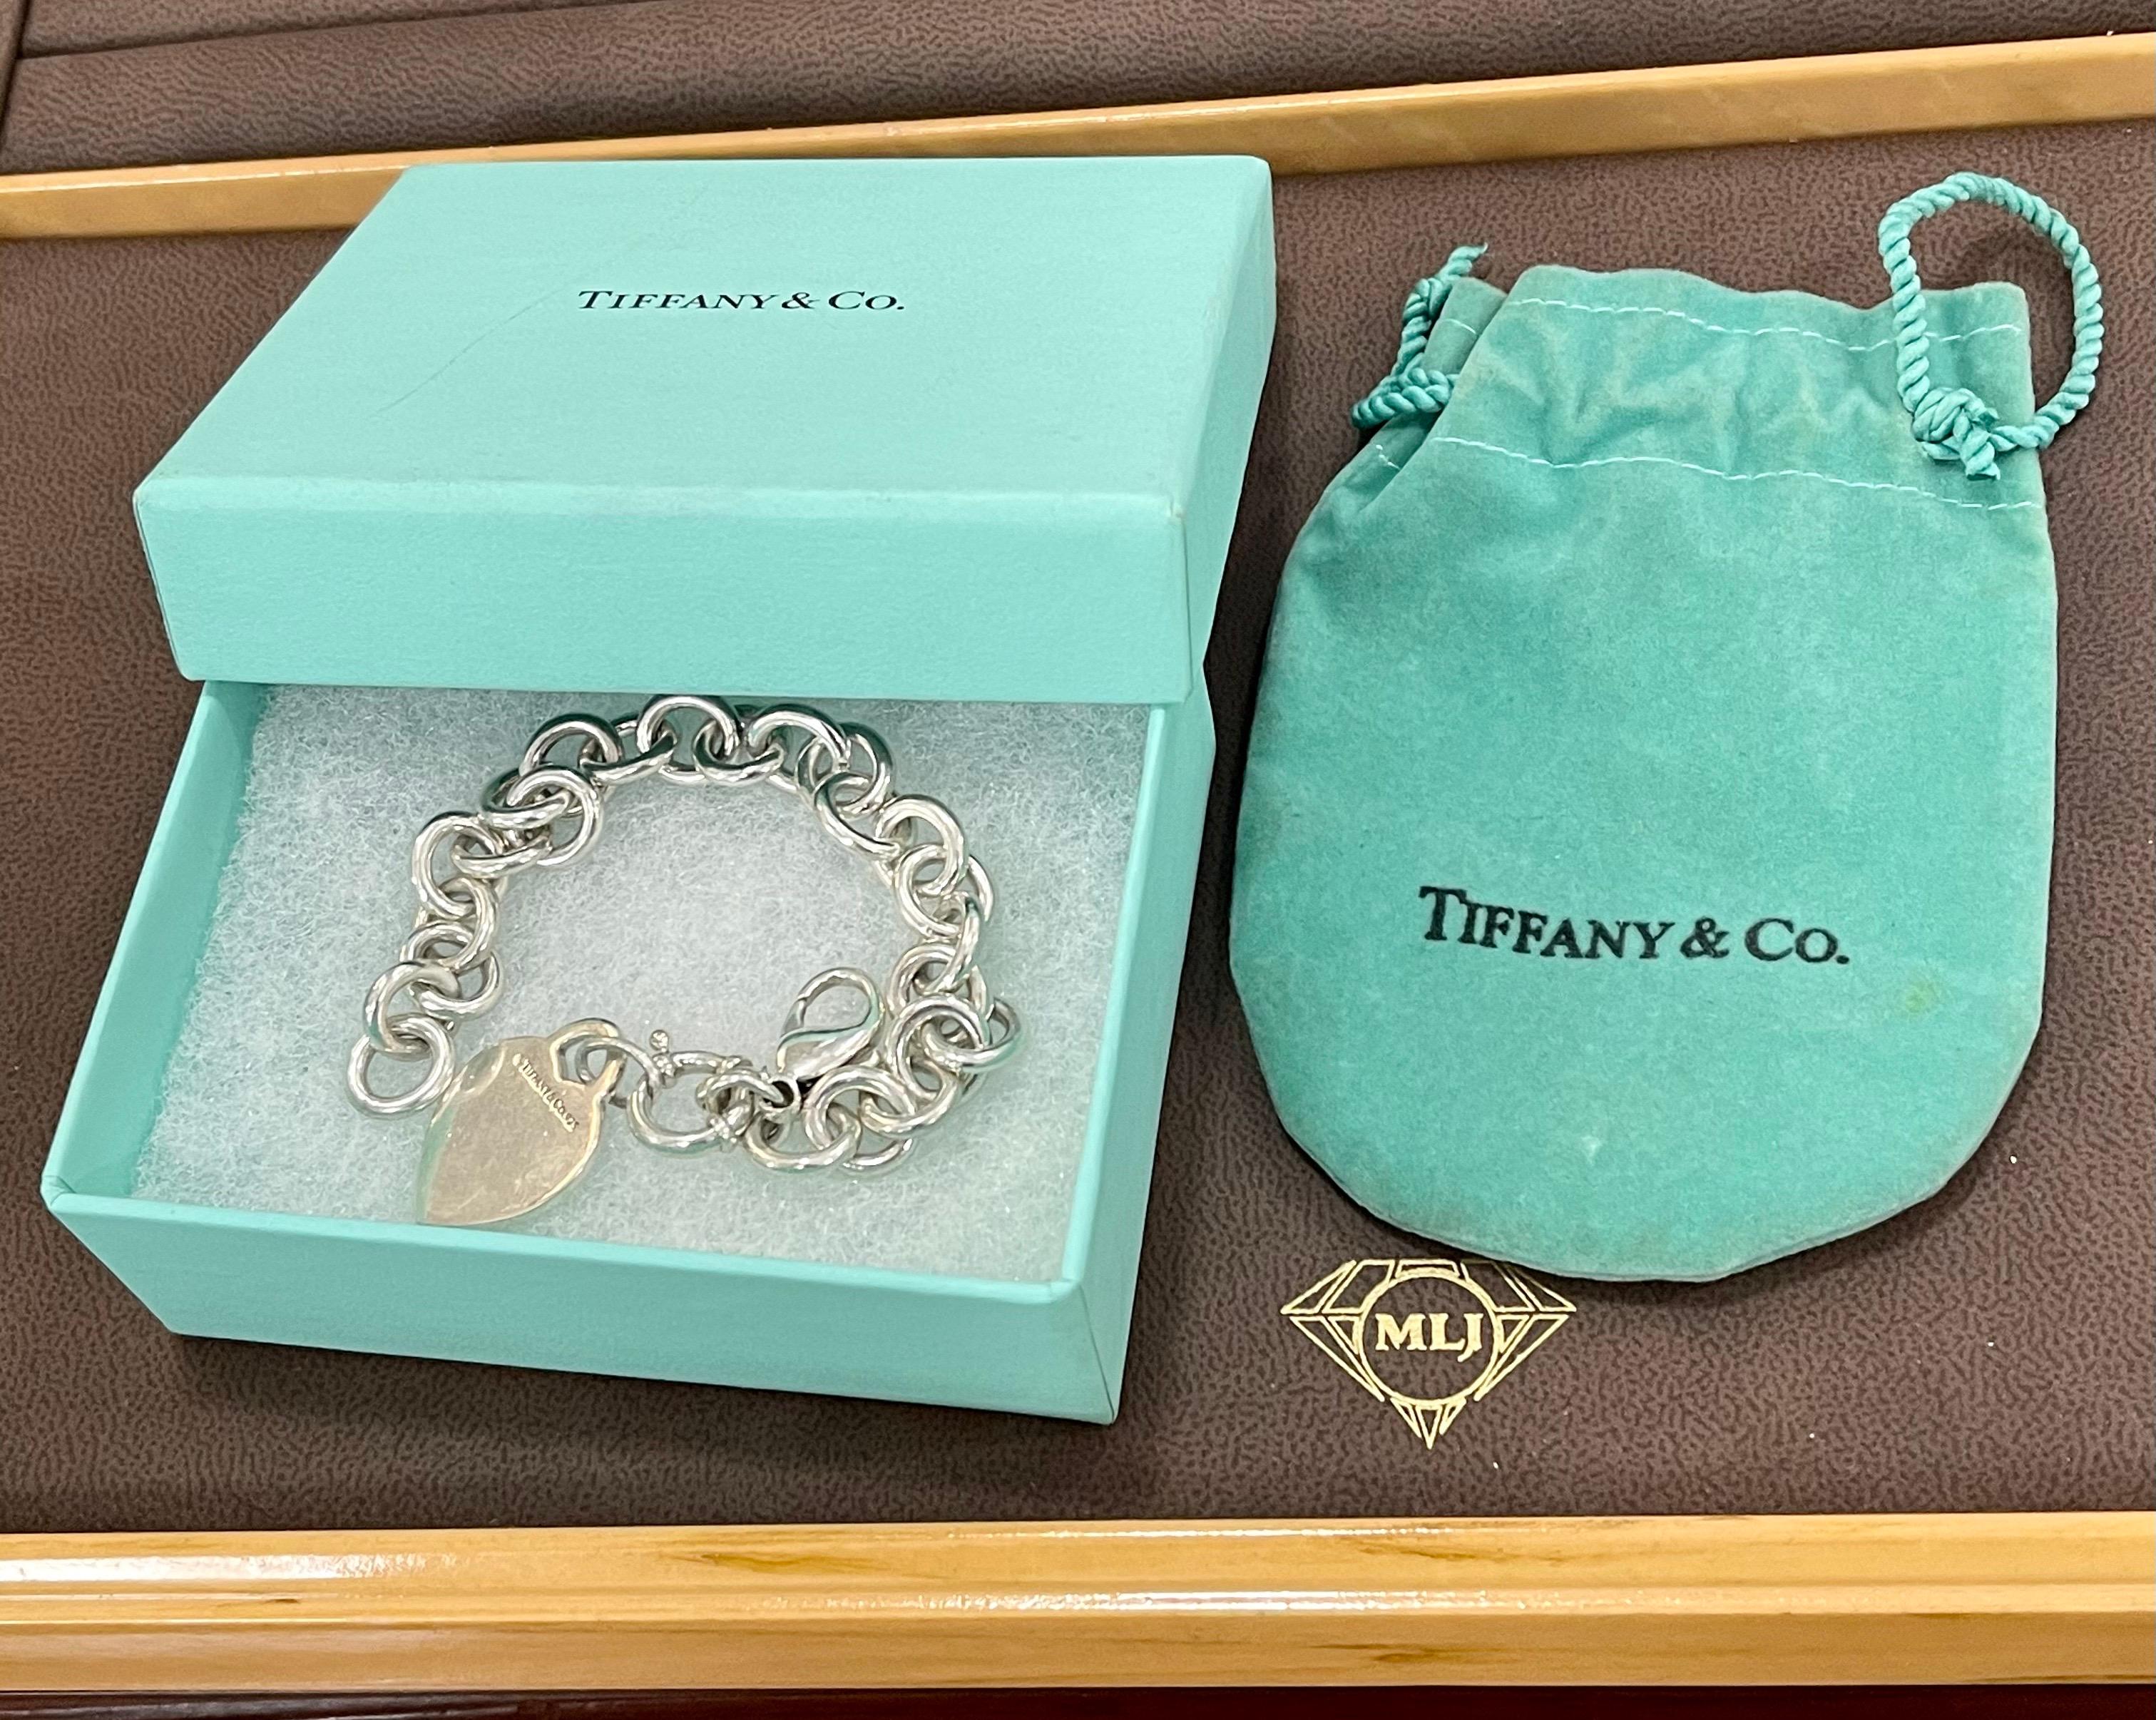 Tiffany & Co. Sterling Silver Heart Tag Toggle Charm Bracelet
An elite authentic bracelet from Tiffany & Co., forged from silver with a fine polished finish, it features a sturdy oval chain link bracelet with a solid heart tag charm. The bracelet